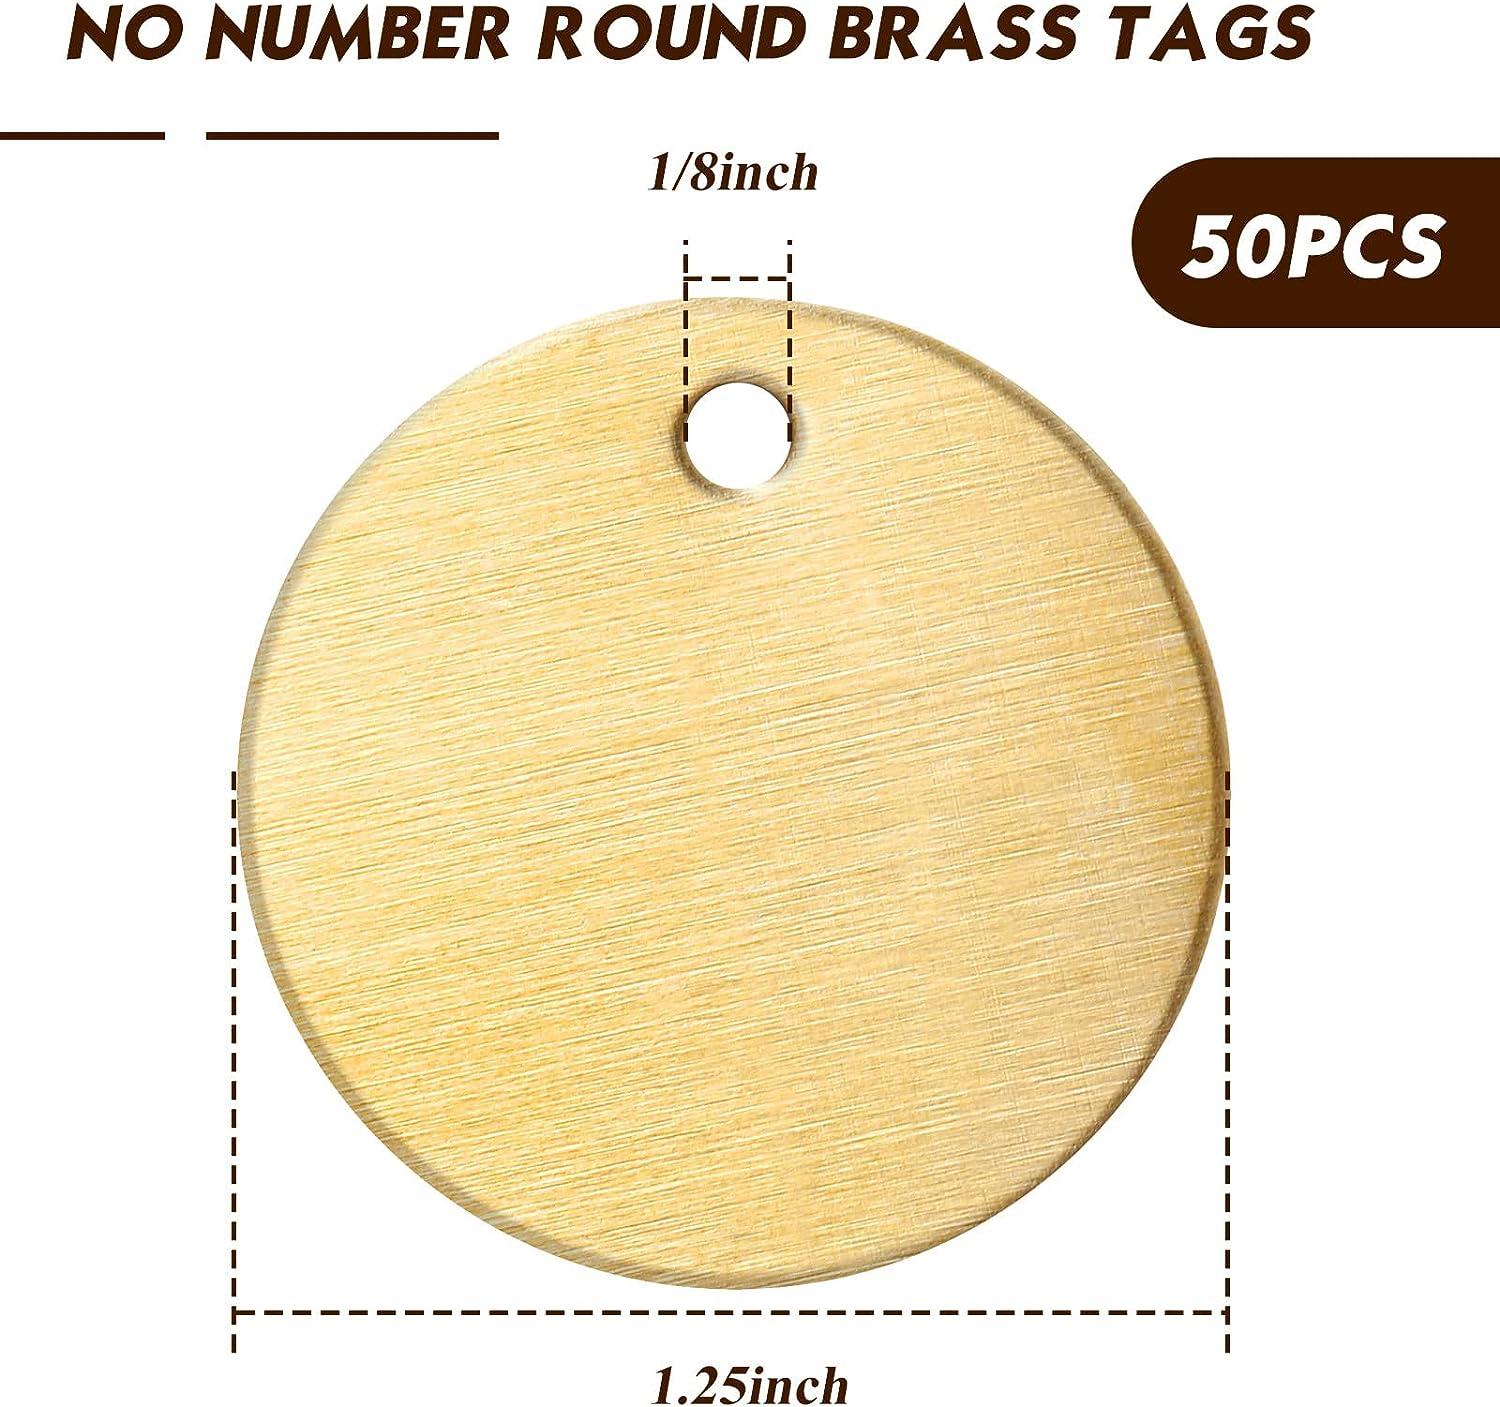 50 Pieces Round Brass Tags 1-1/4 Inch Diameter Blank Valve Tags Gold Brass  Tags for Stamping Stamping Tag with Hole for Pets Plants Doors